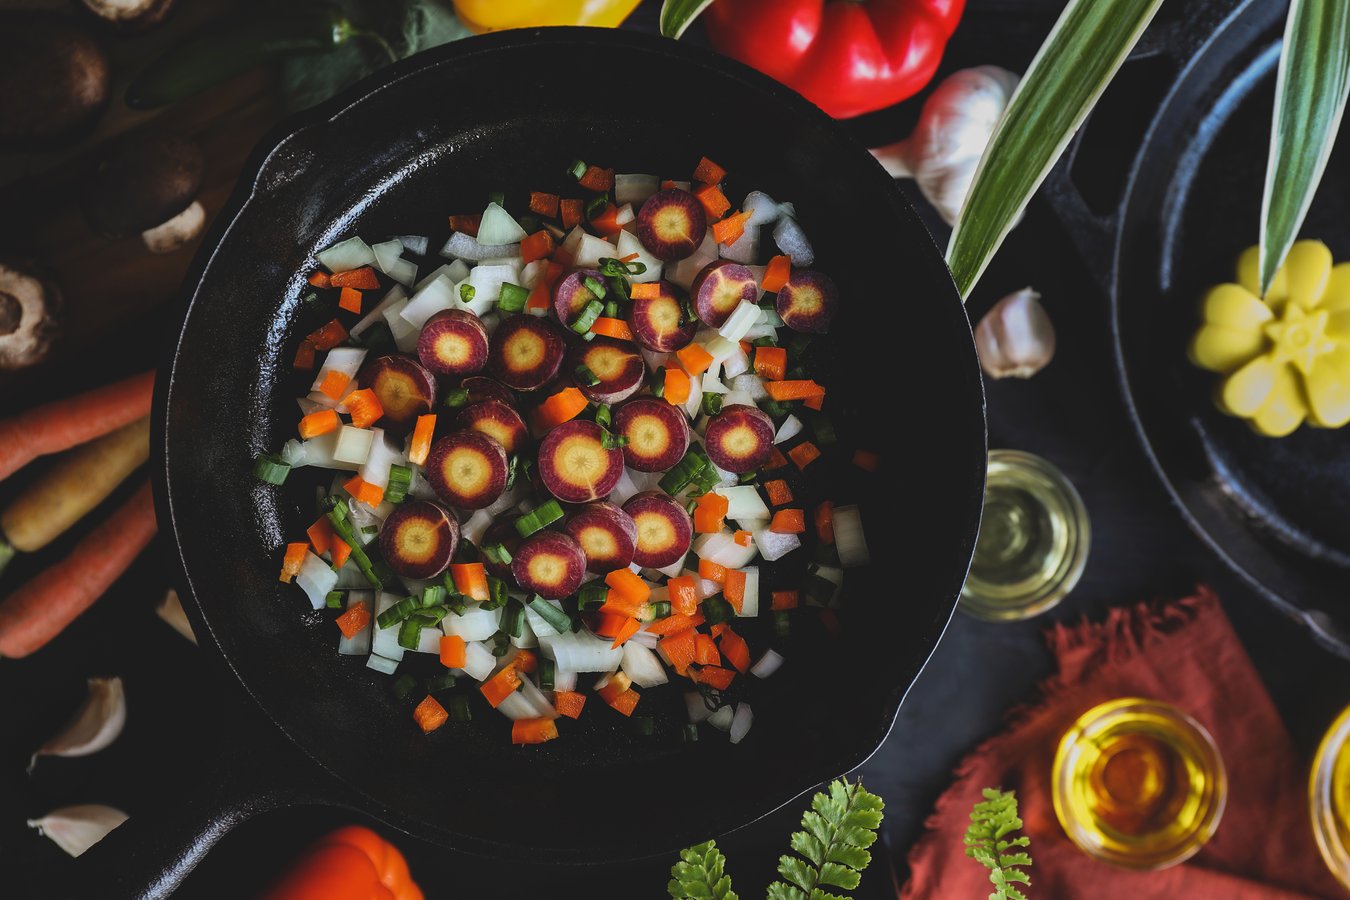 Chopped vegetables in a cast iron skillet